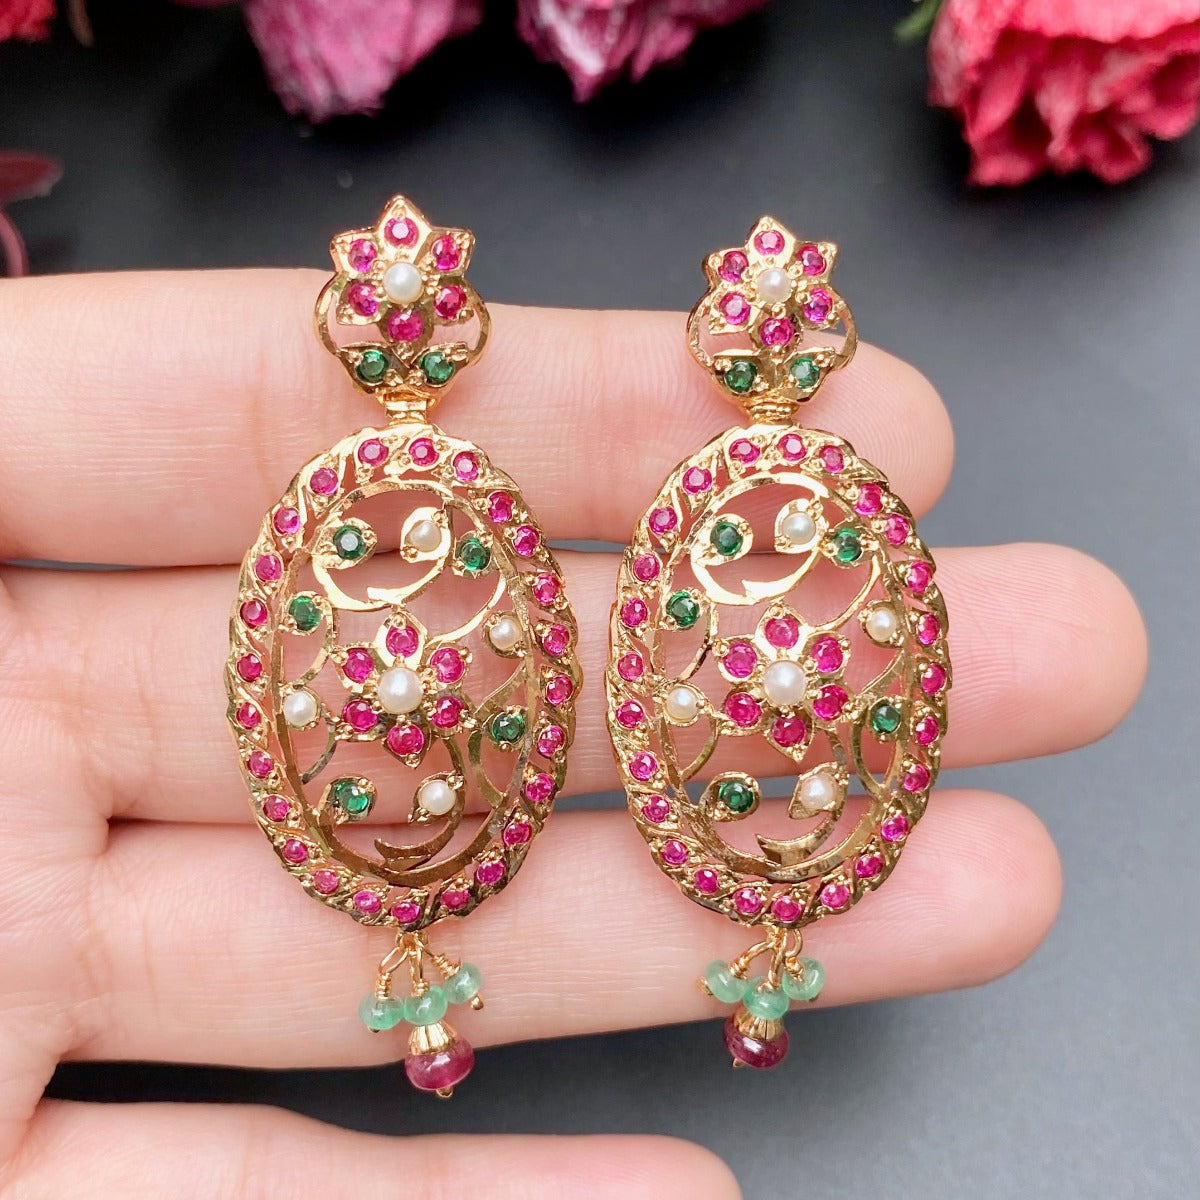 edwardian earrings with ruby emerald and seed pearls